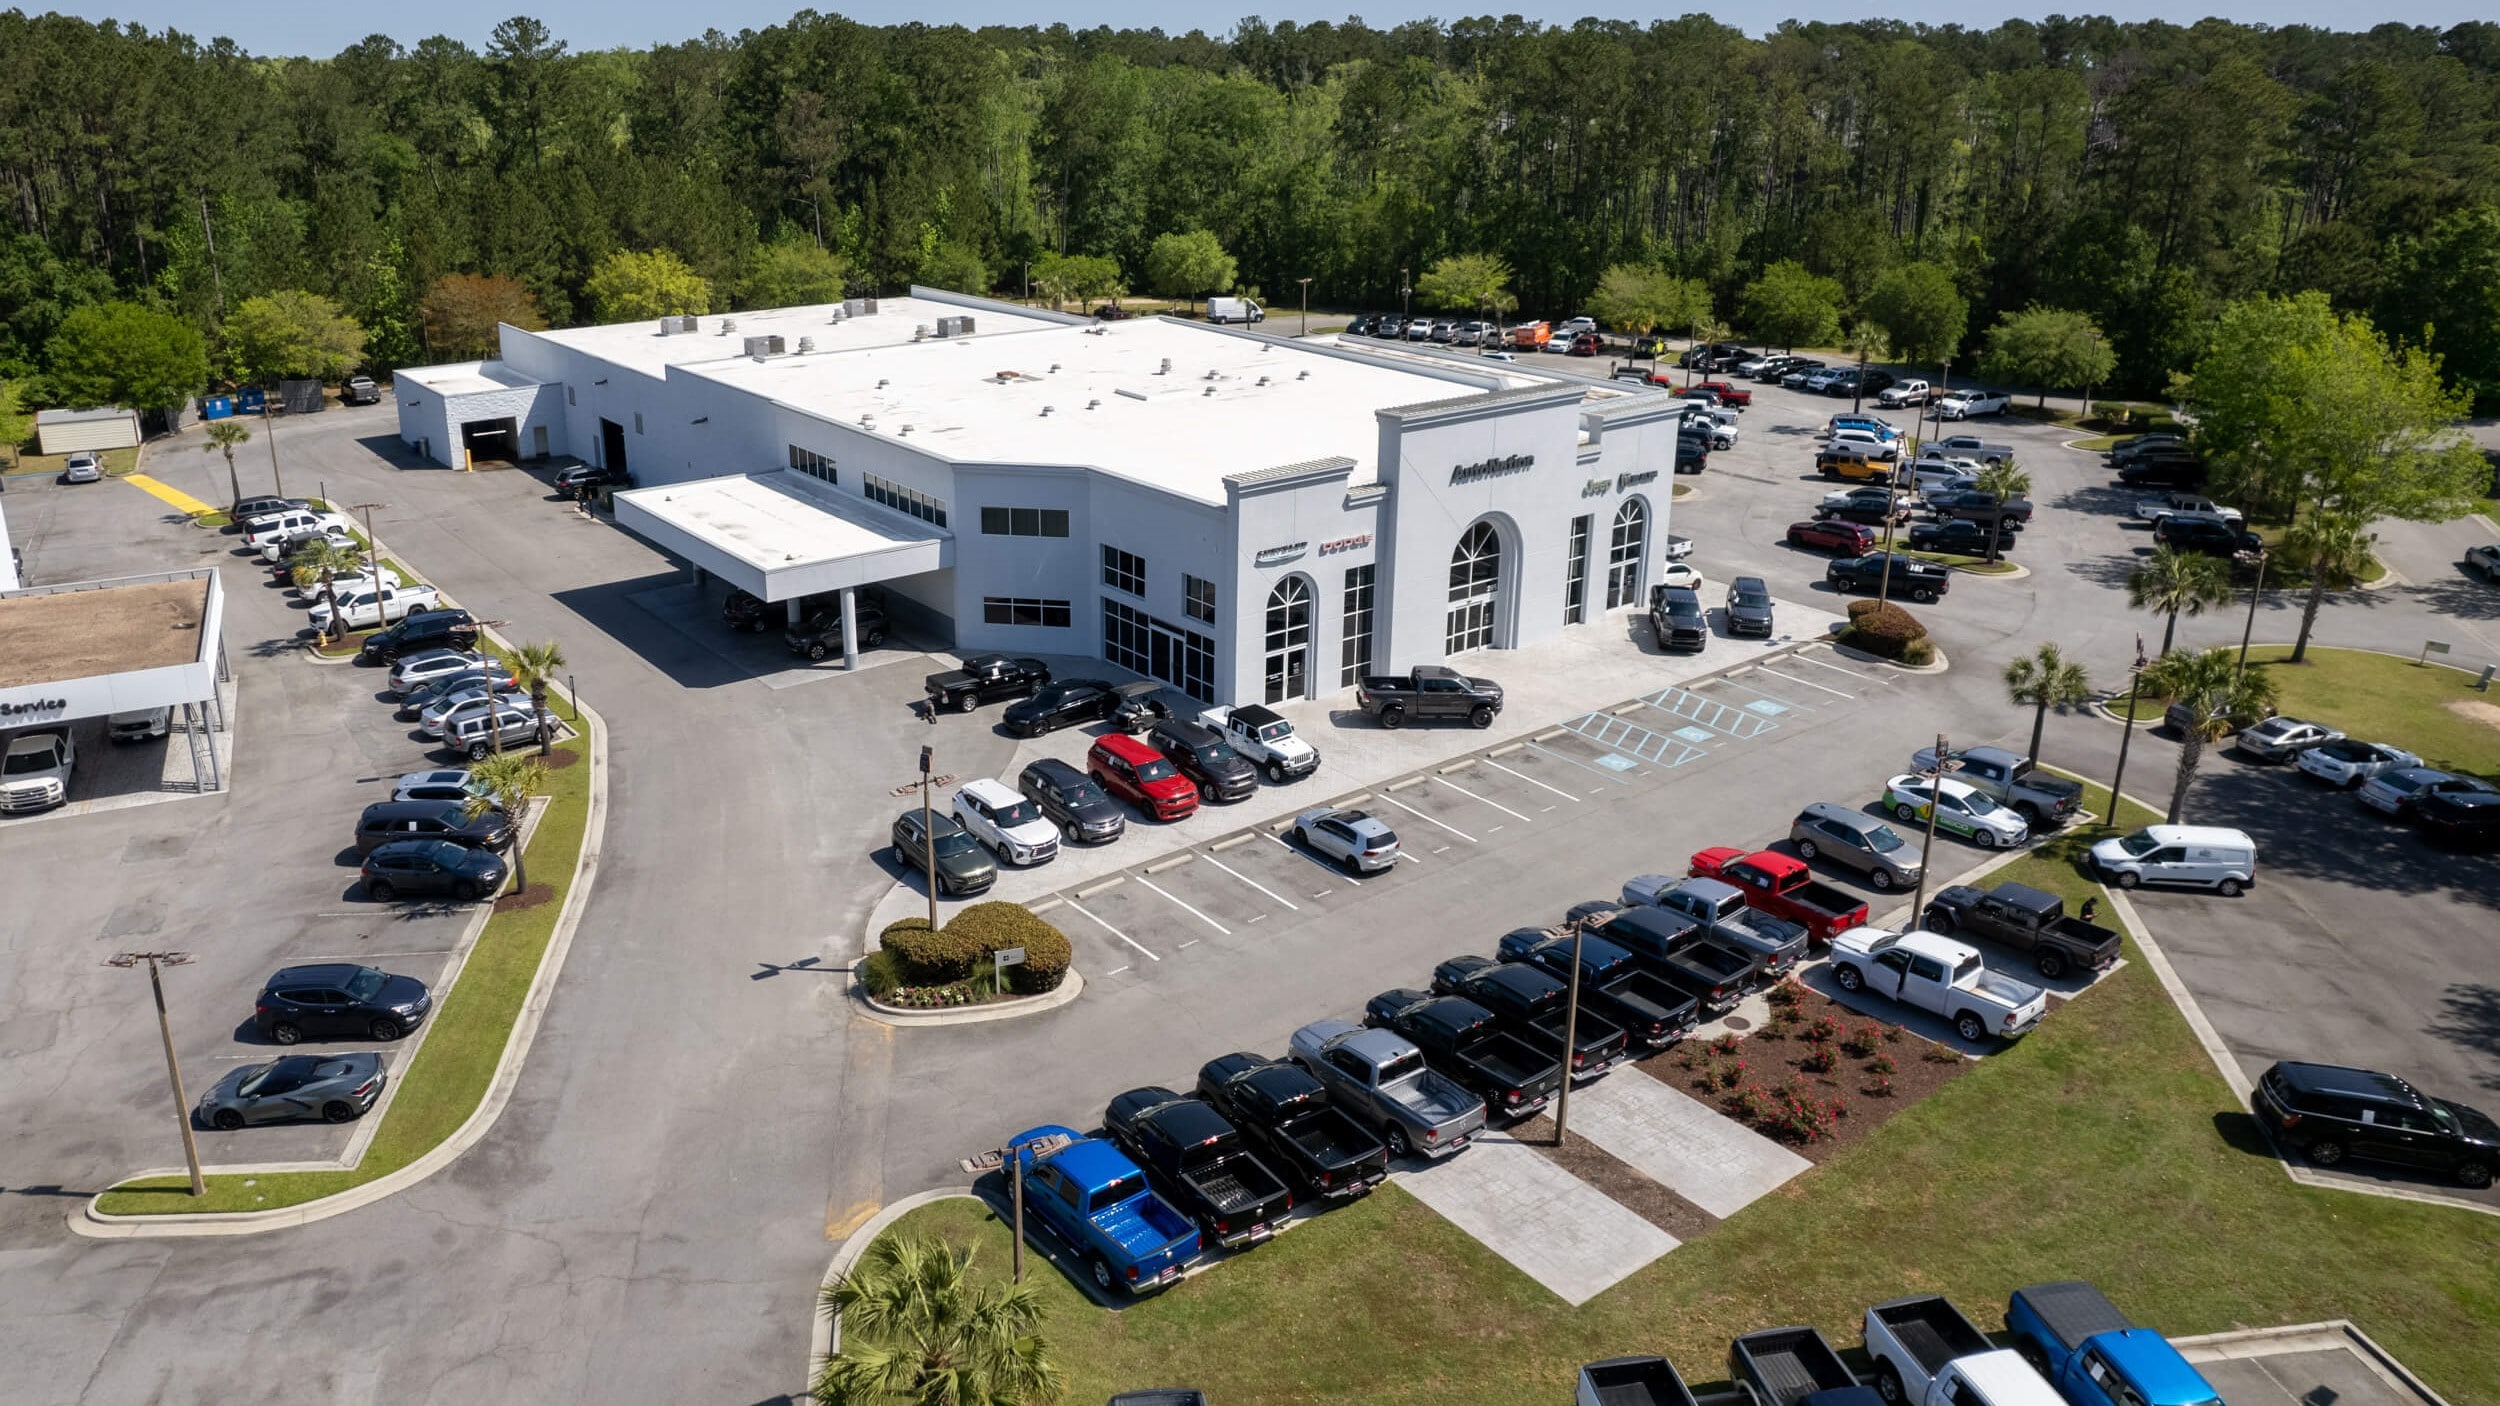 Overhead exterior view of AutoNation Chrysler Dodge Jeep Ram Hilton Head during the day. There is a clear sky and many vehicles parked near the grey building. Trees and greenery are visible around the parking lot and surrounding area.